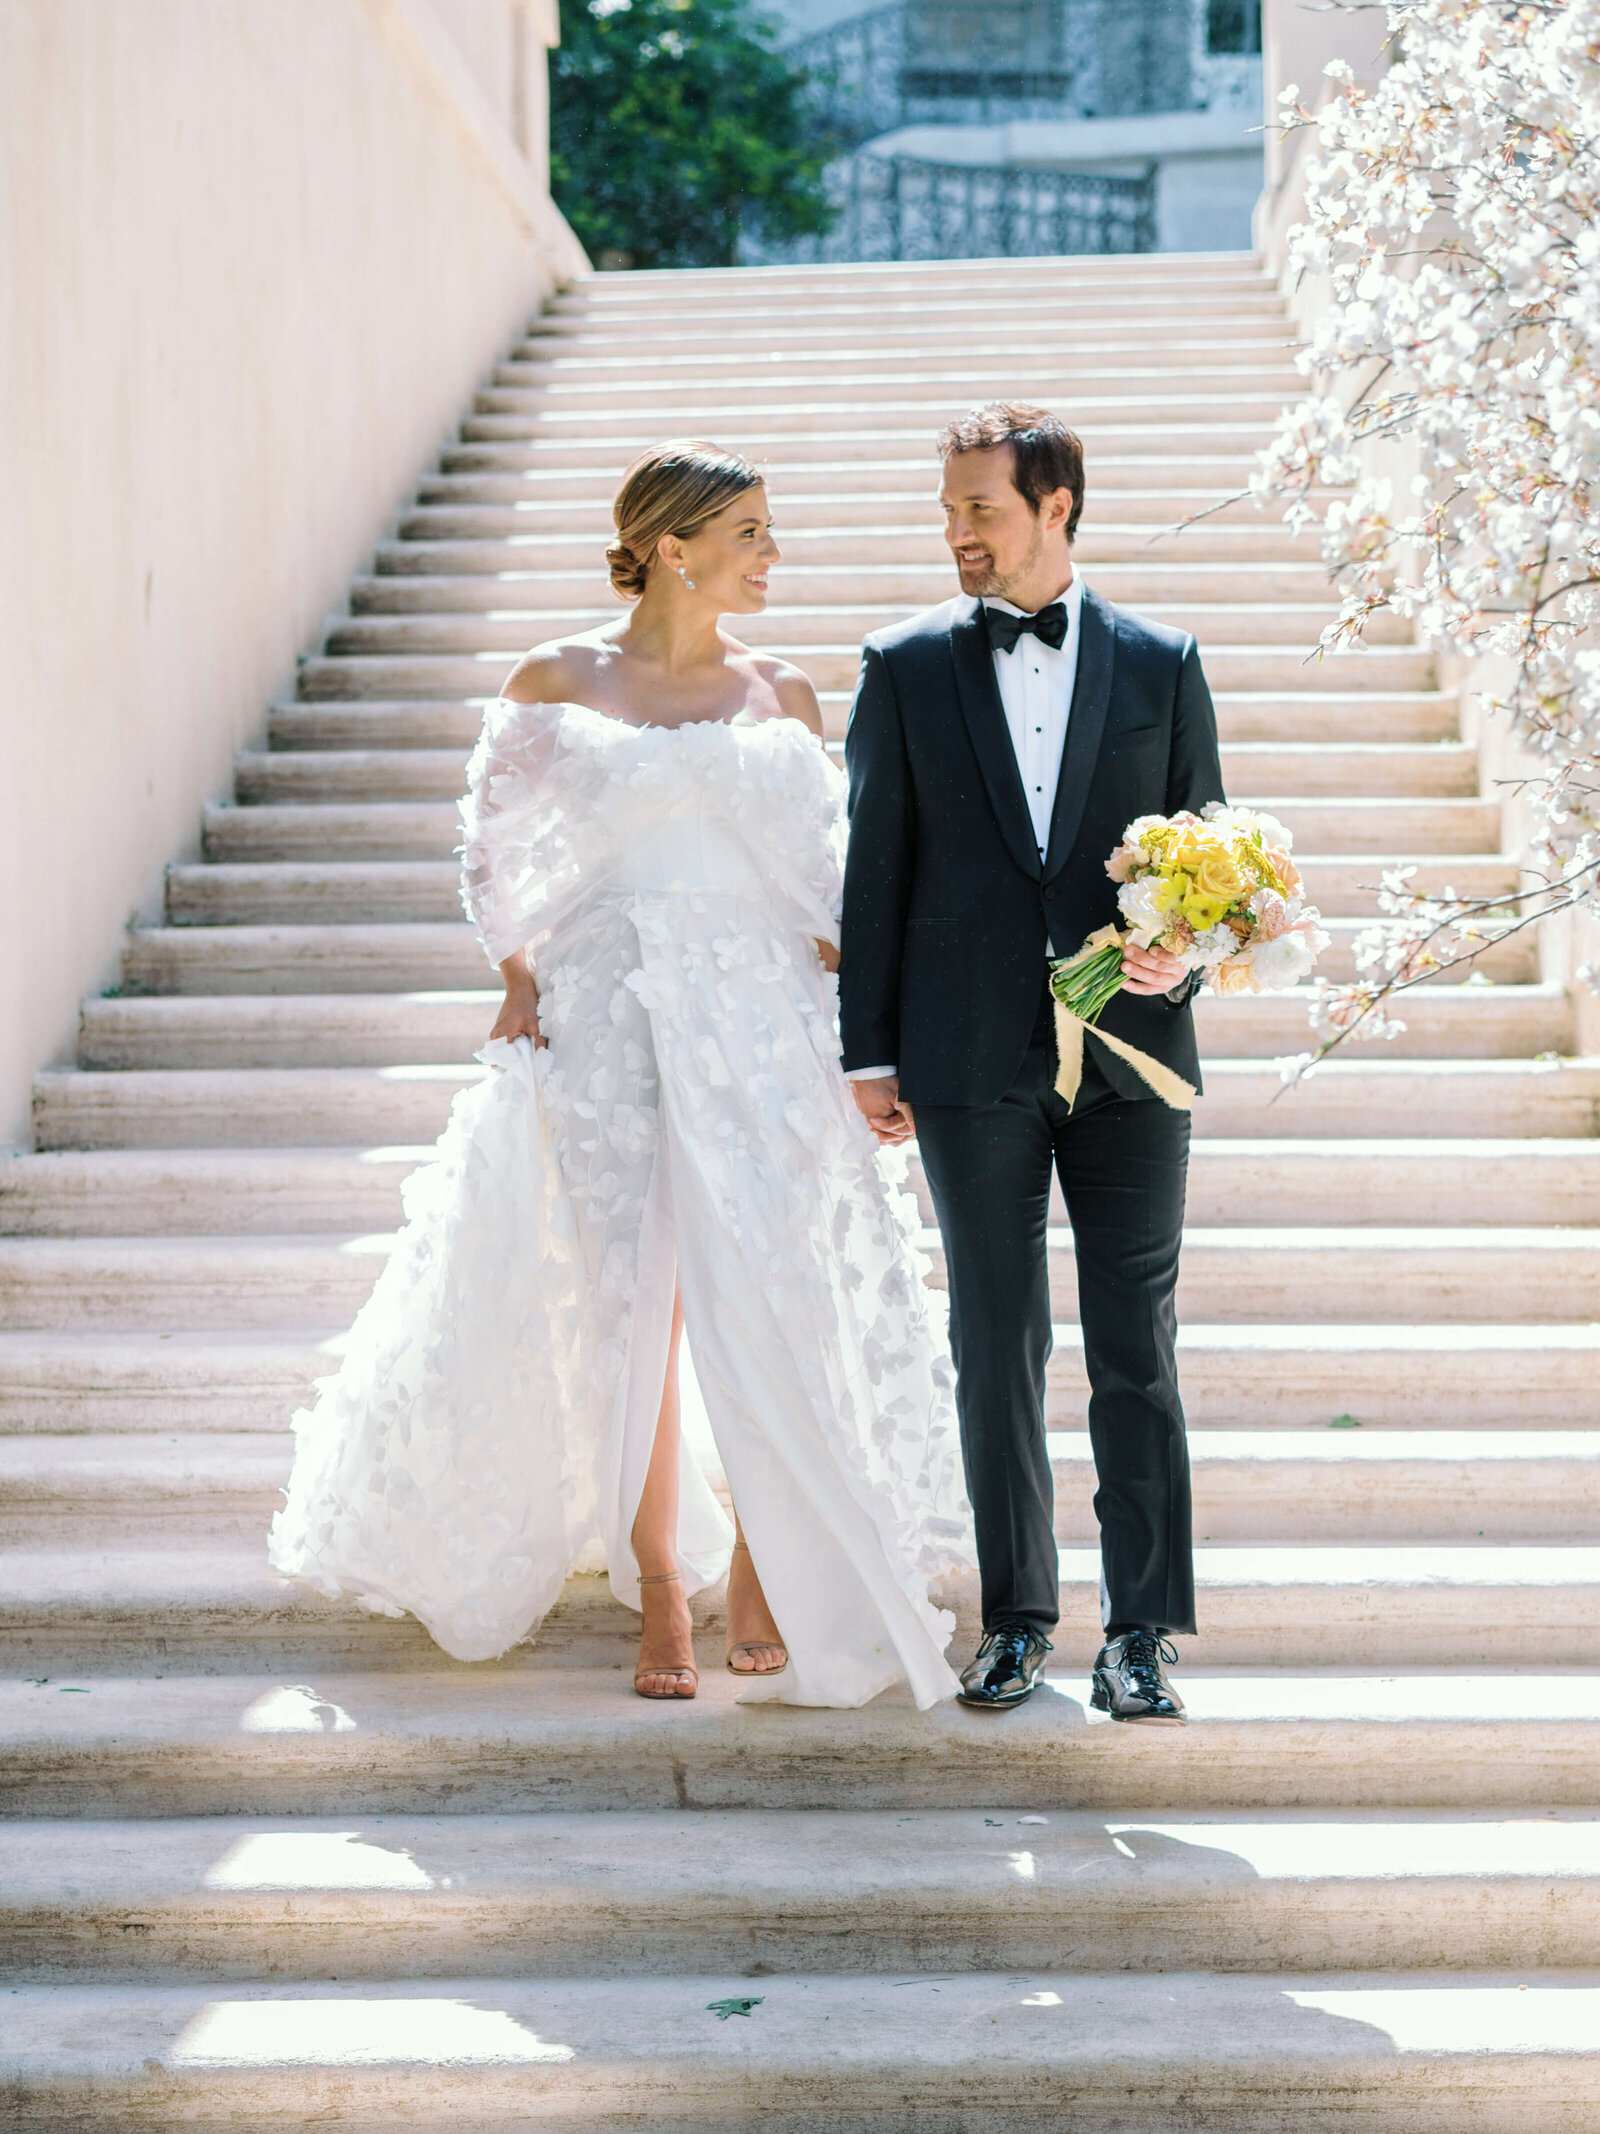 A newly married couple walks down the white stone steps during their wedding photos